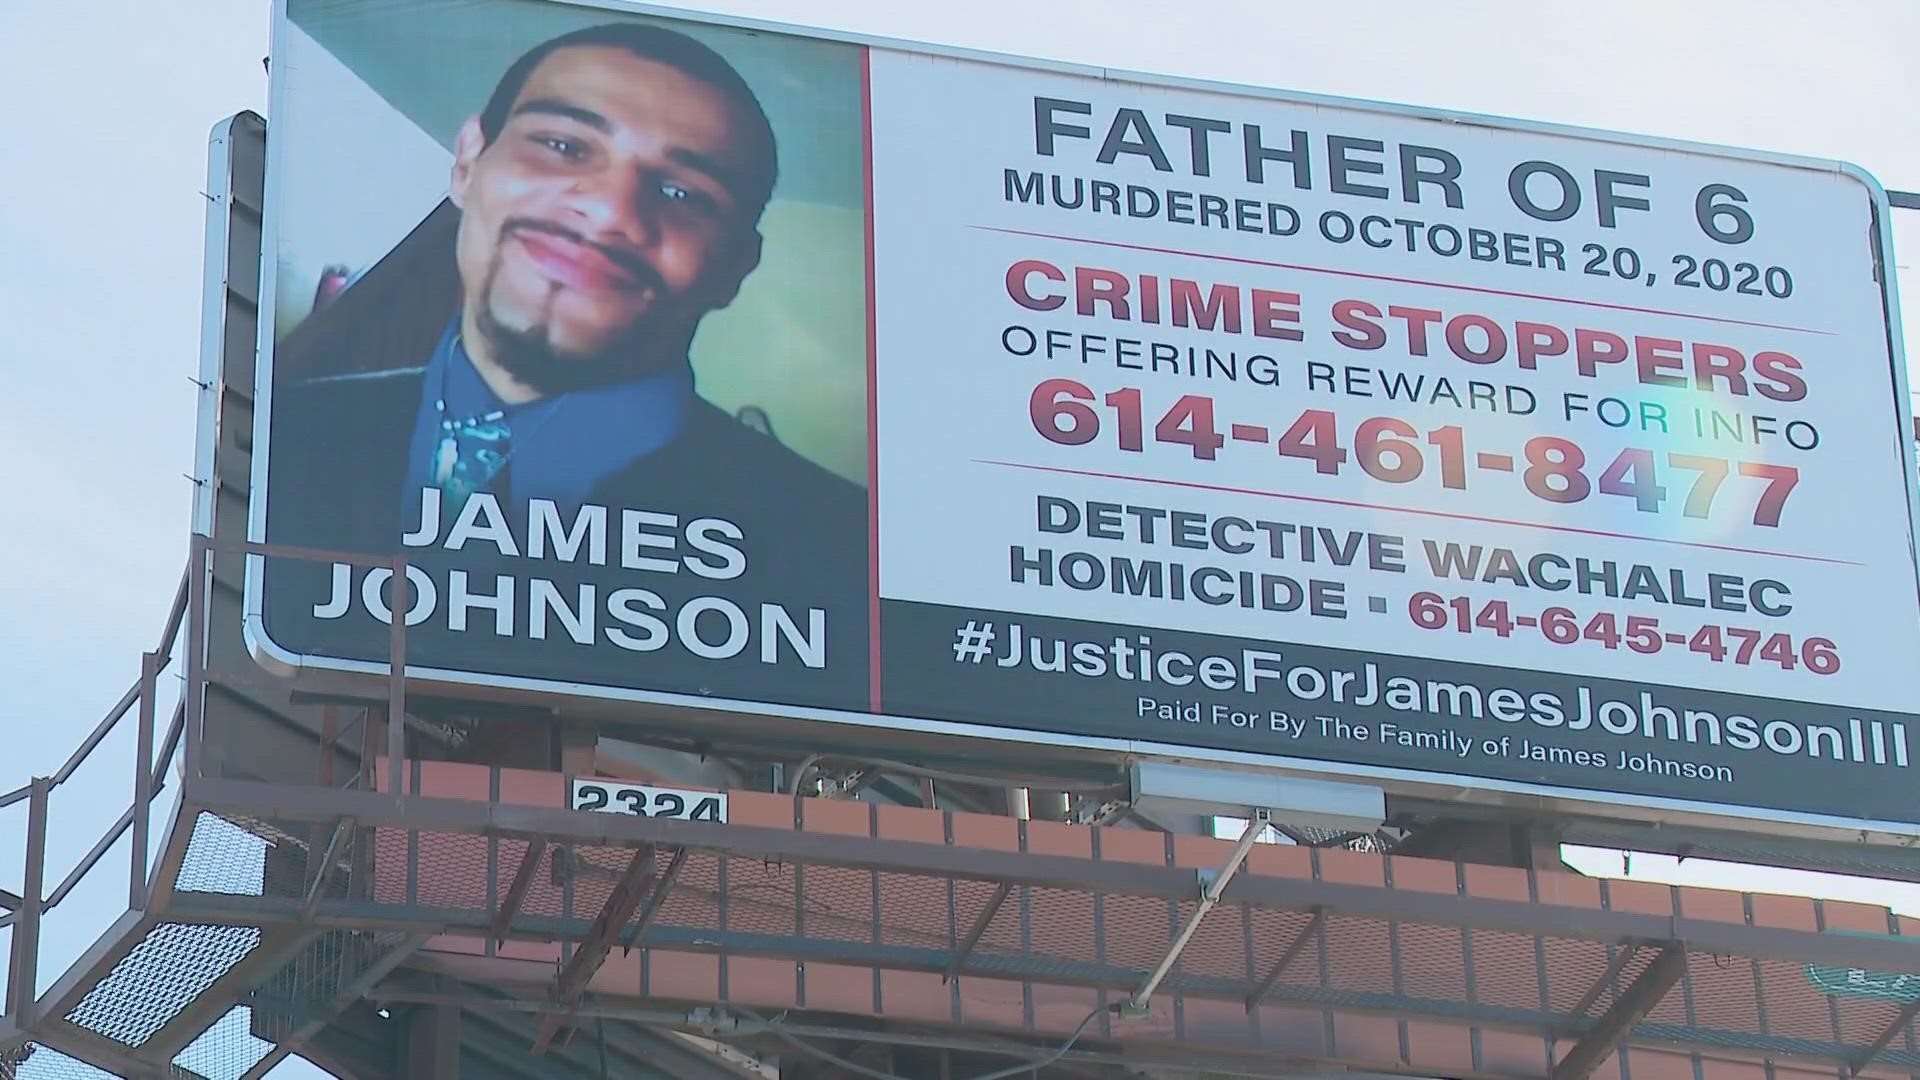 James Johnson was fatally shot more than two years ago at a a Sunoco gas station.